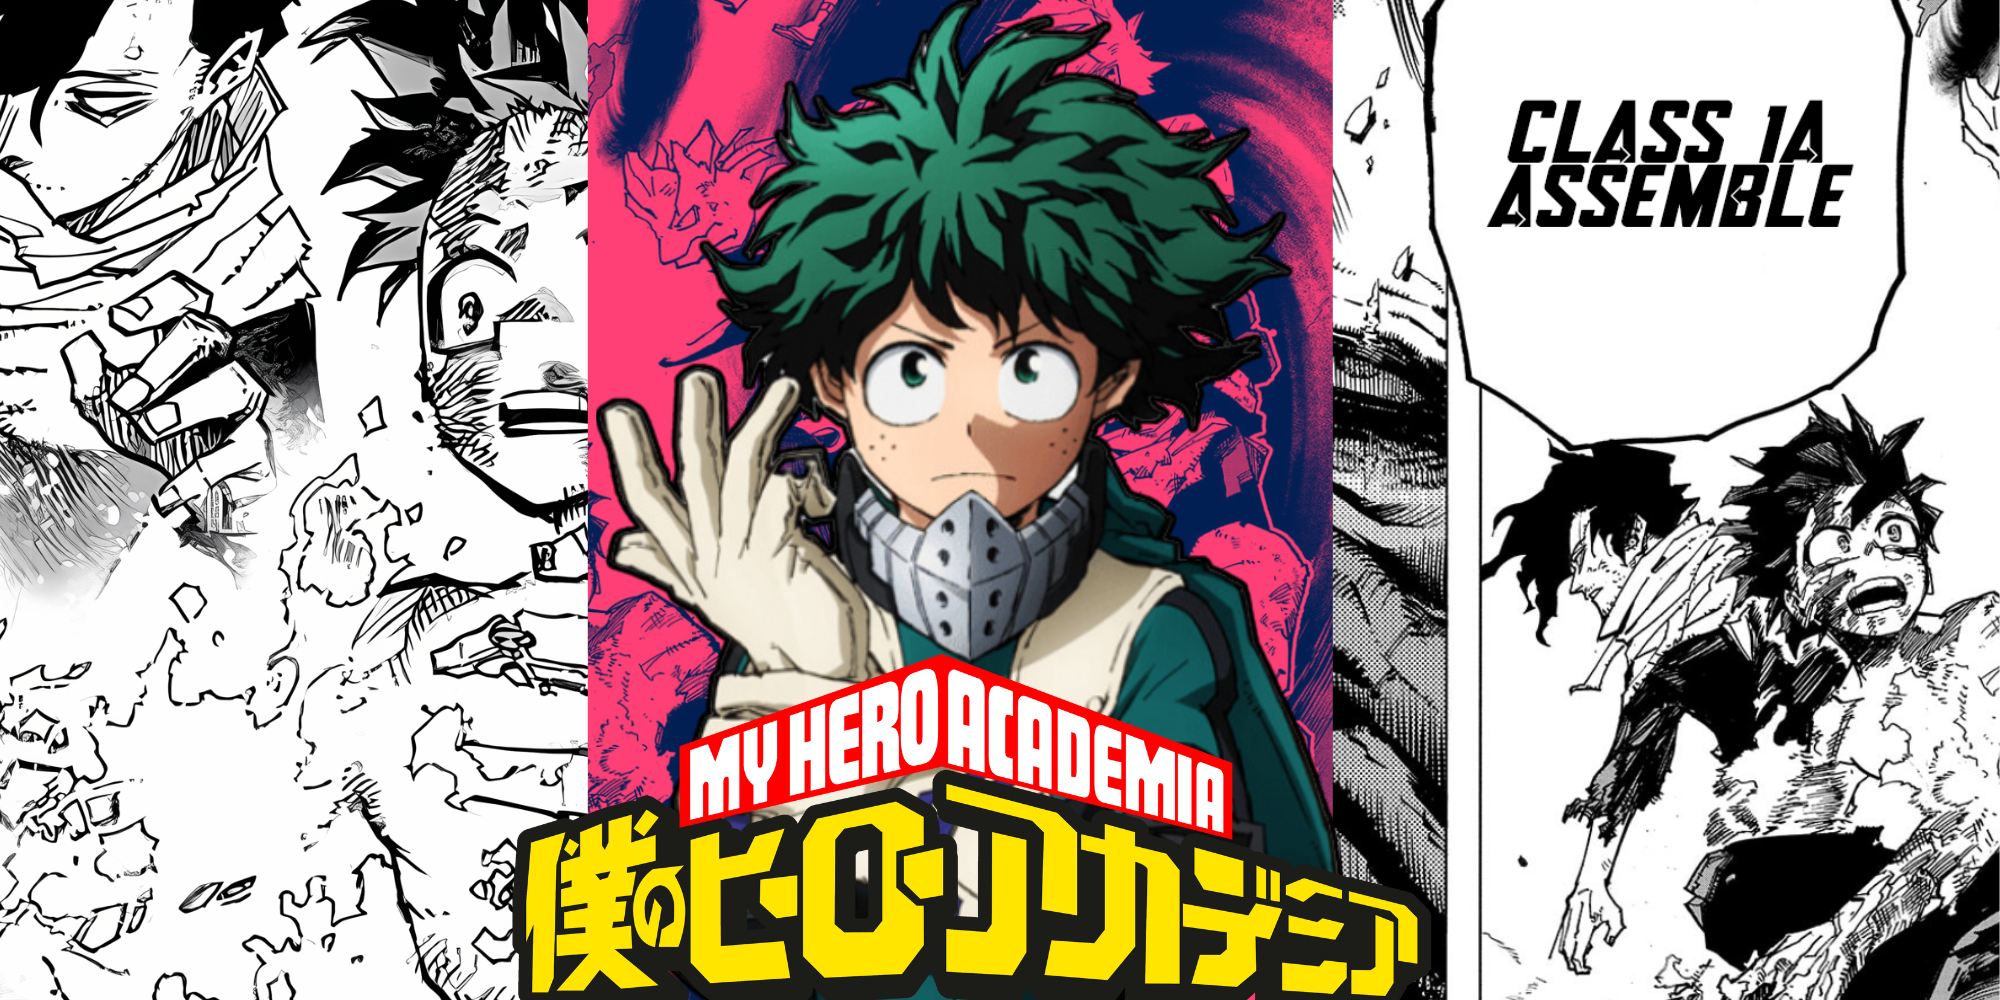 Custom Image of MHA Chapter 420 with Deku in the center